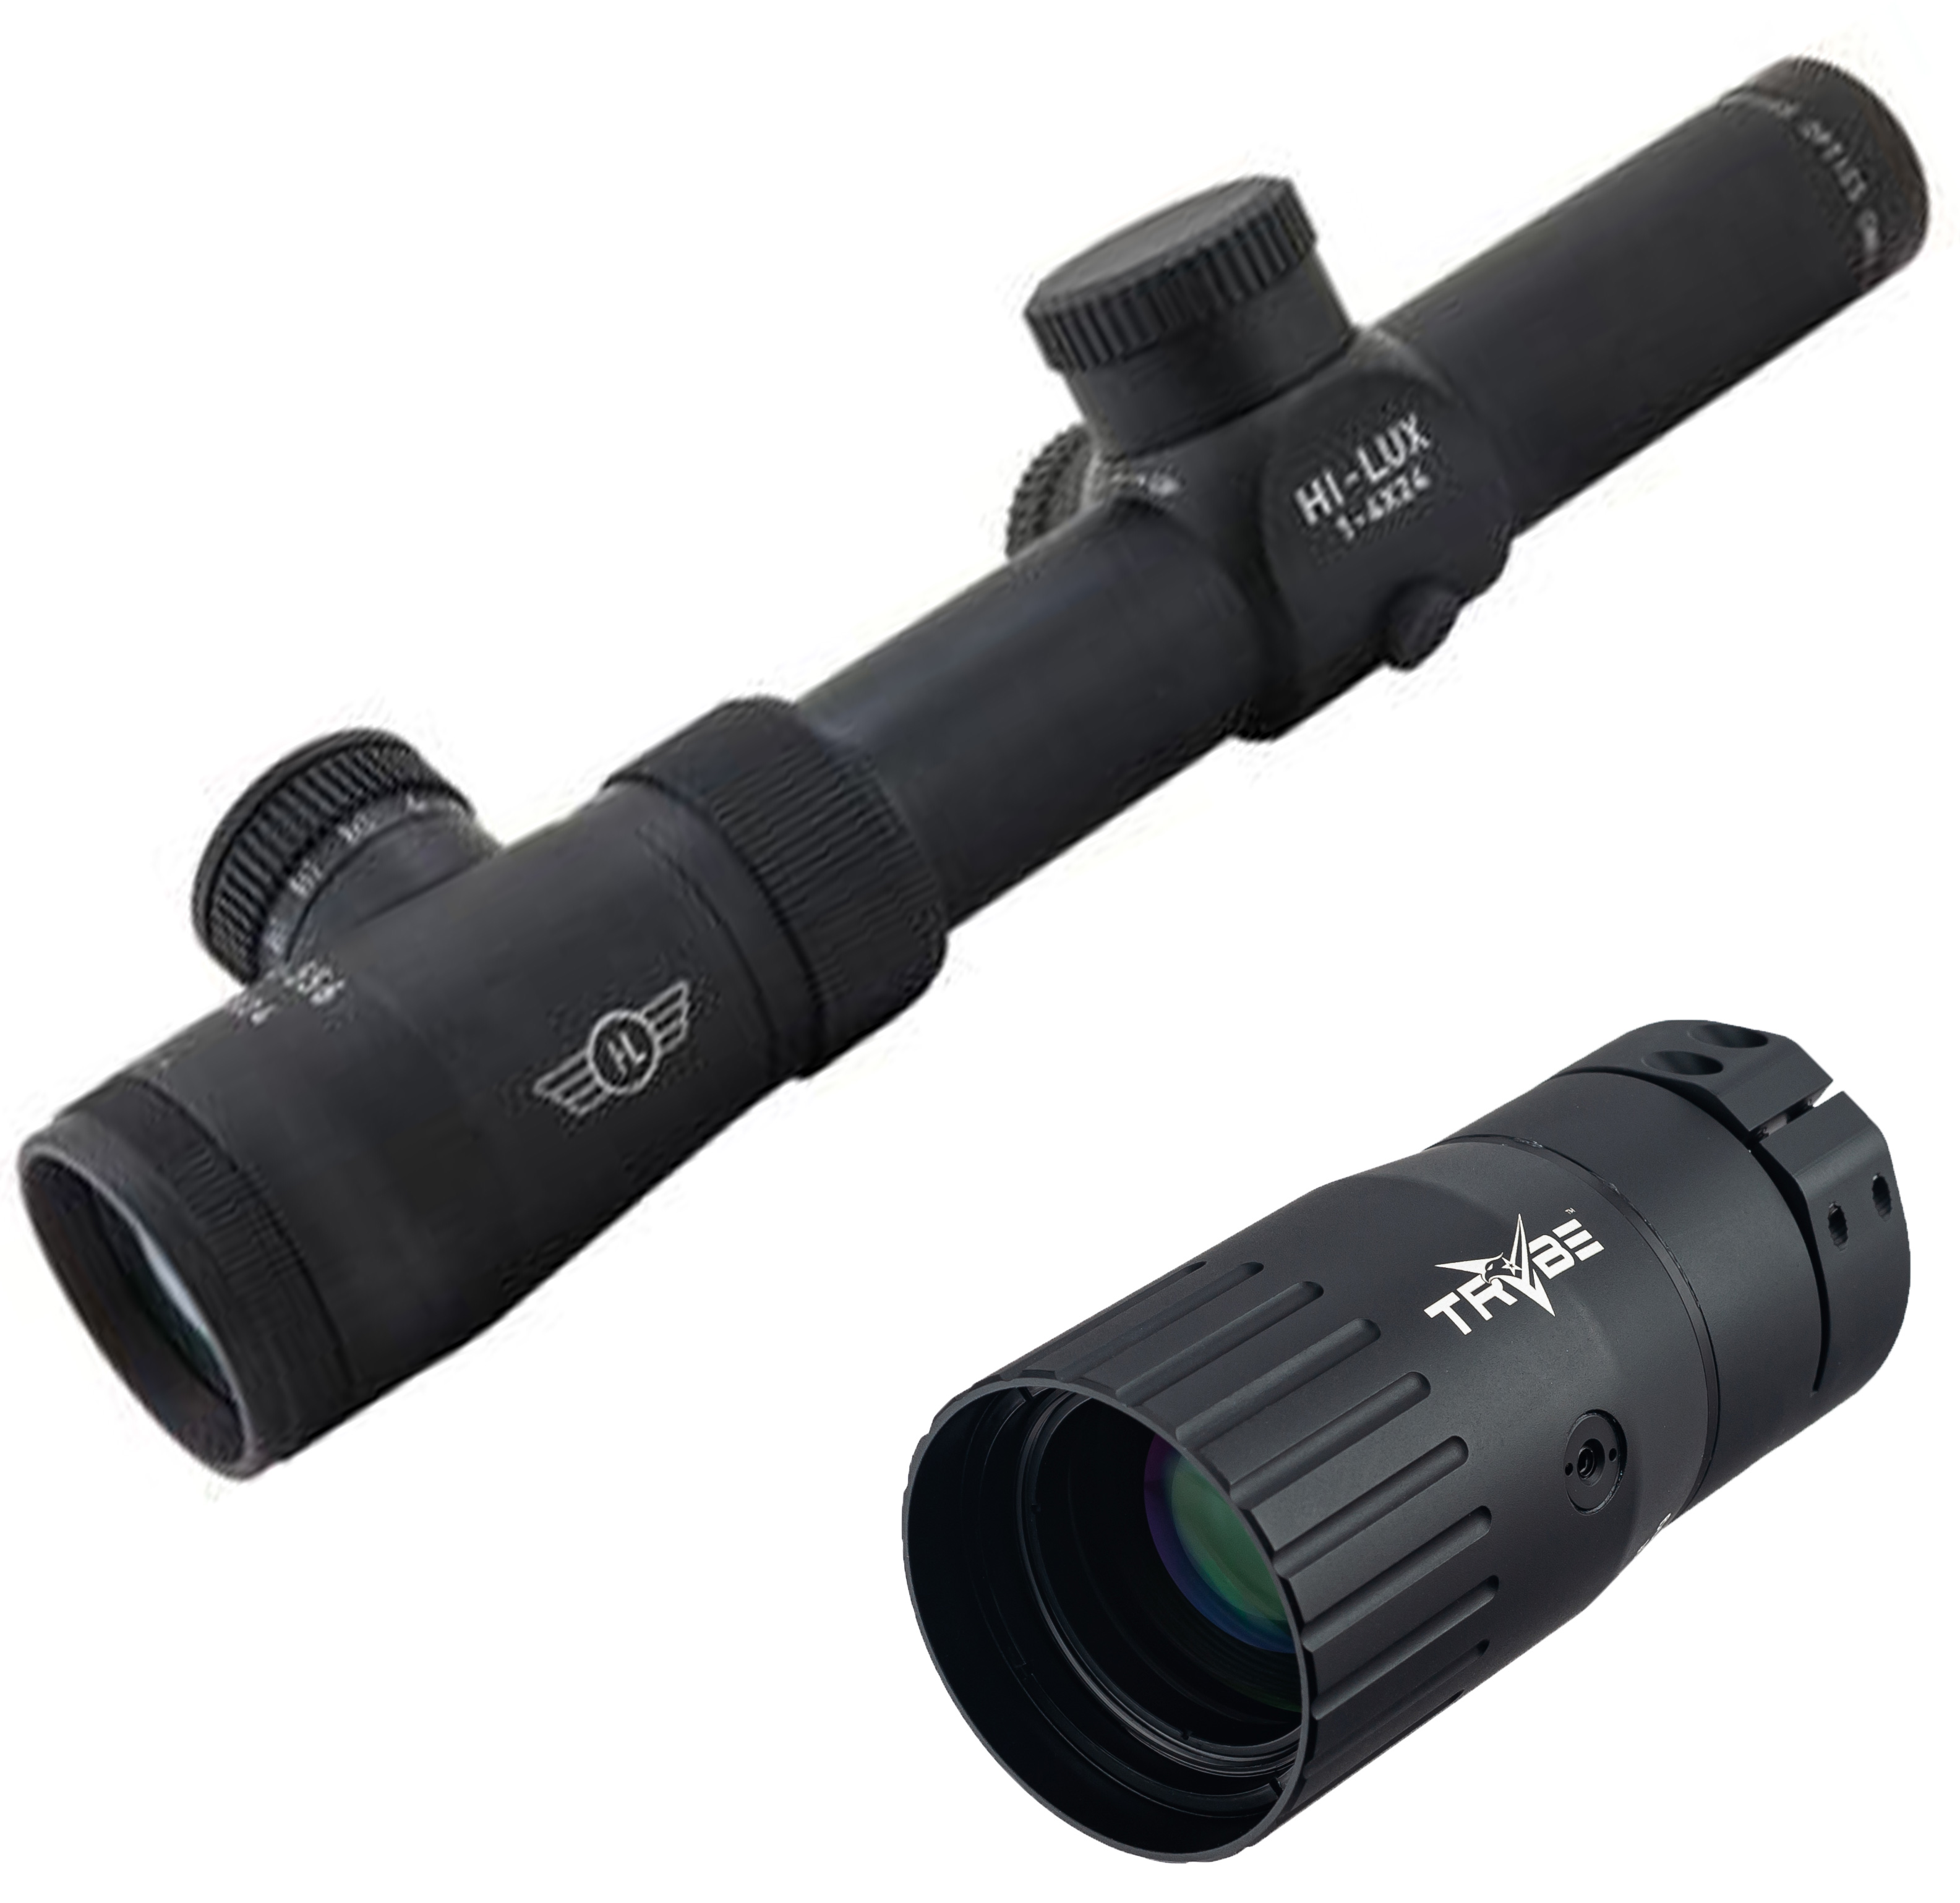 Hi Lux Optics Cmr4 556 1 4x24mm Tactical Riflescopes W Illuminated 5 56 Nato c Reticle Up To 26 Off W Free Shipping